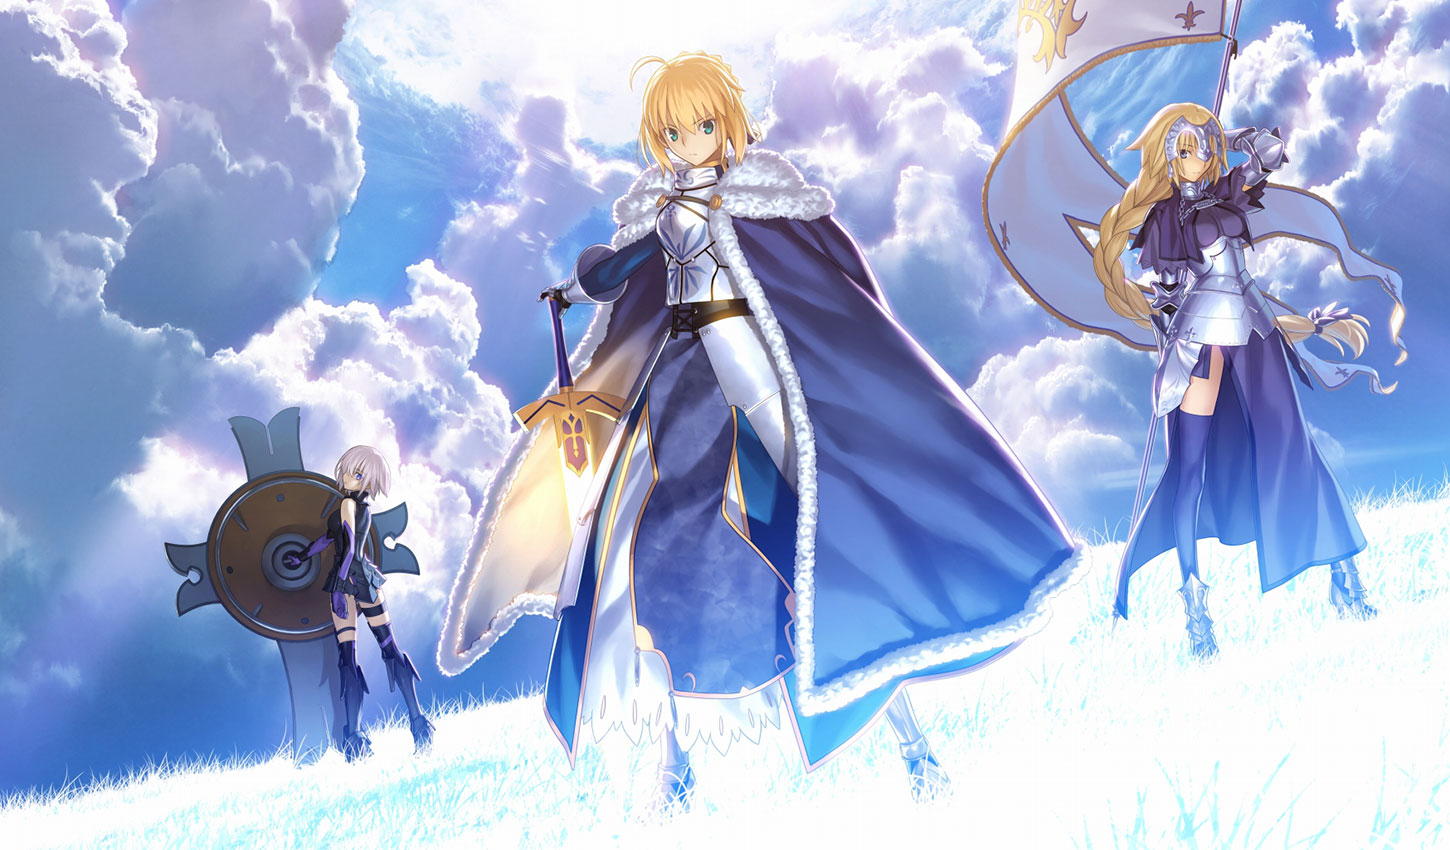 Sony's Fate/Grand Order Hits $3 Billion in Global Player Spending